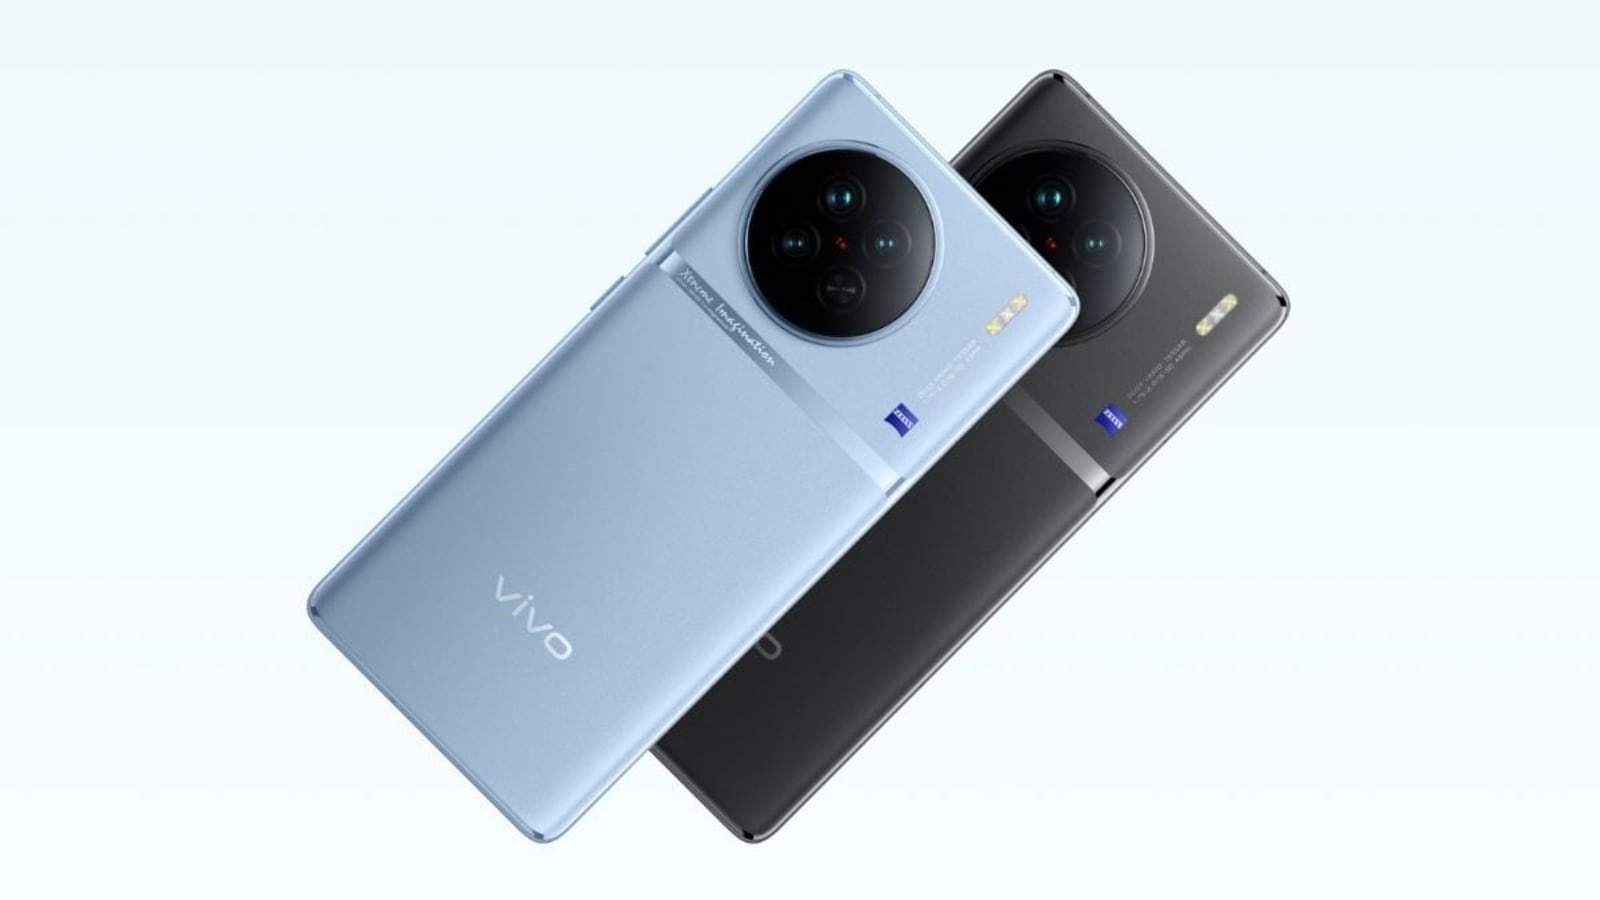 Vivo X100 Pro Unboxing Video Surfaces Online Ahead of November 13 Launch